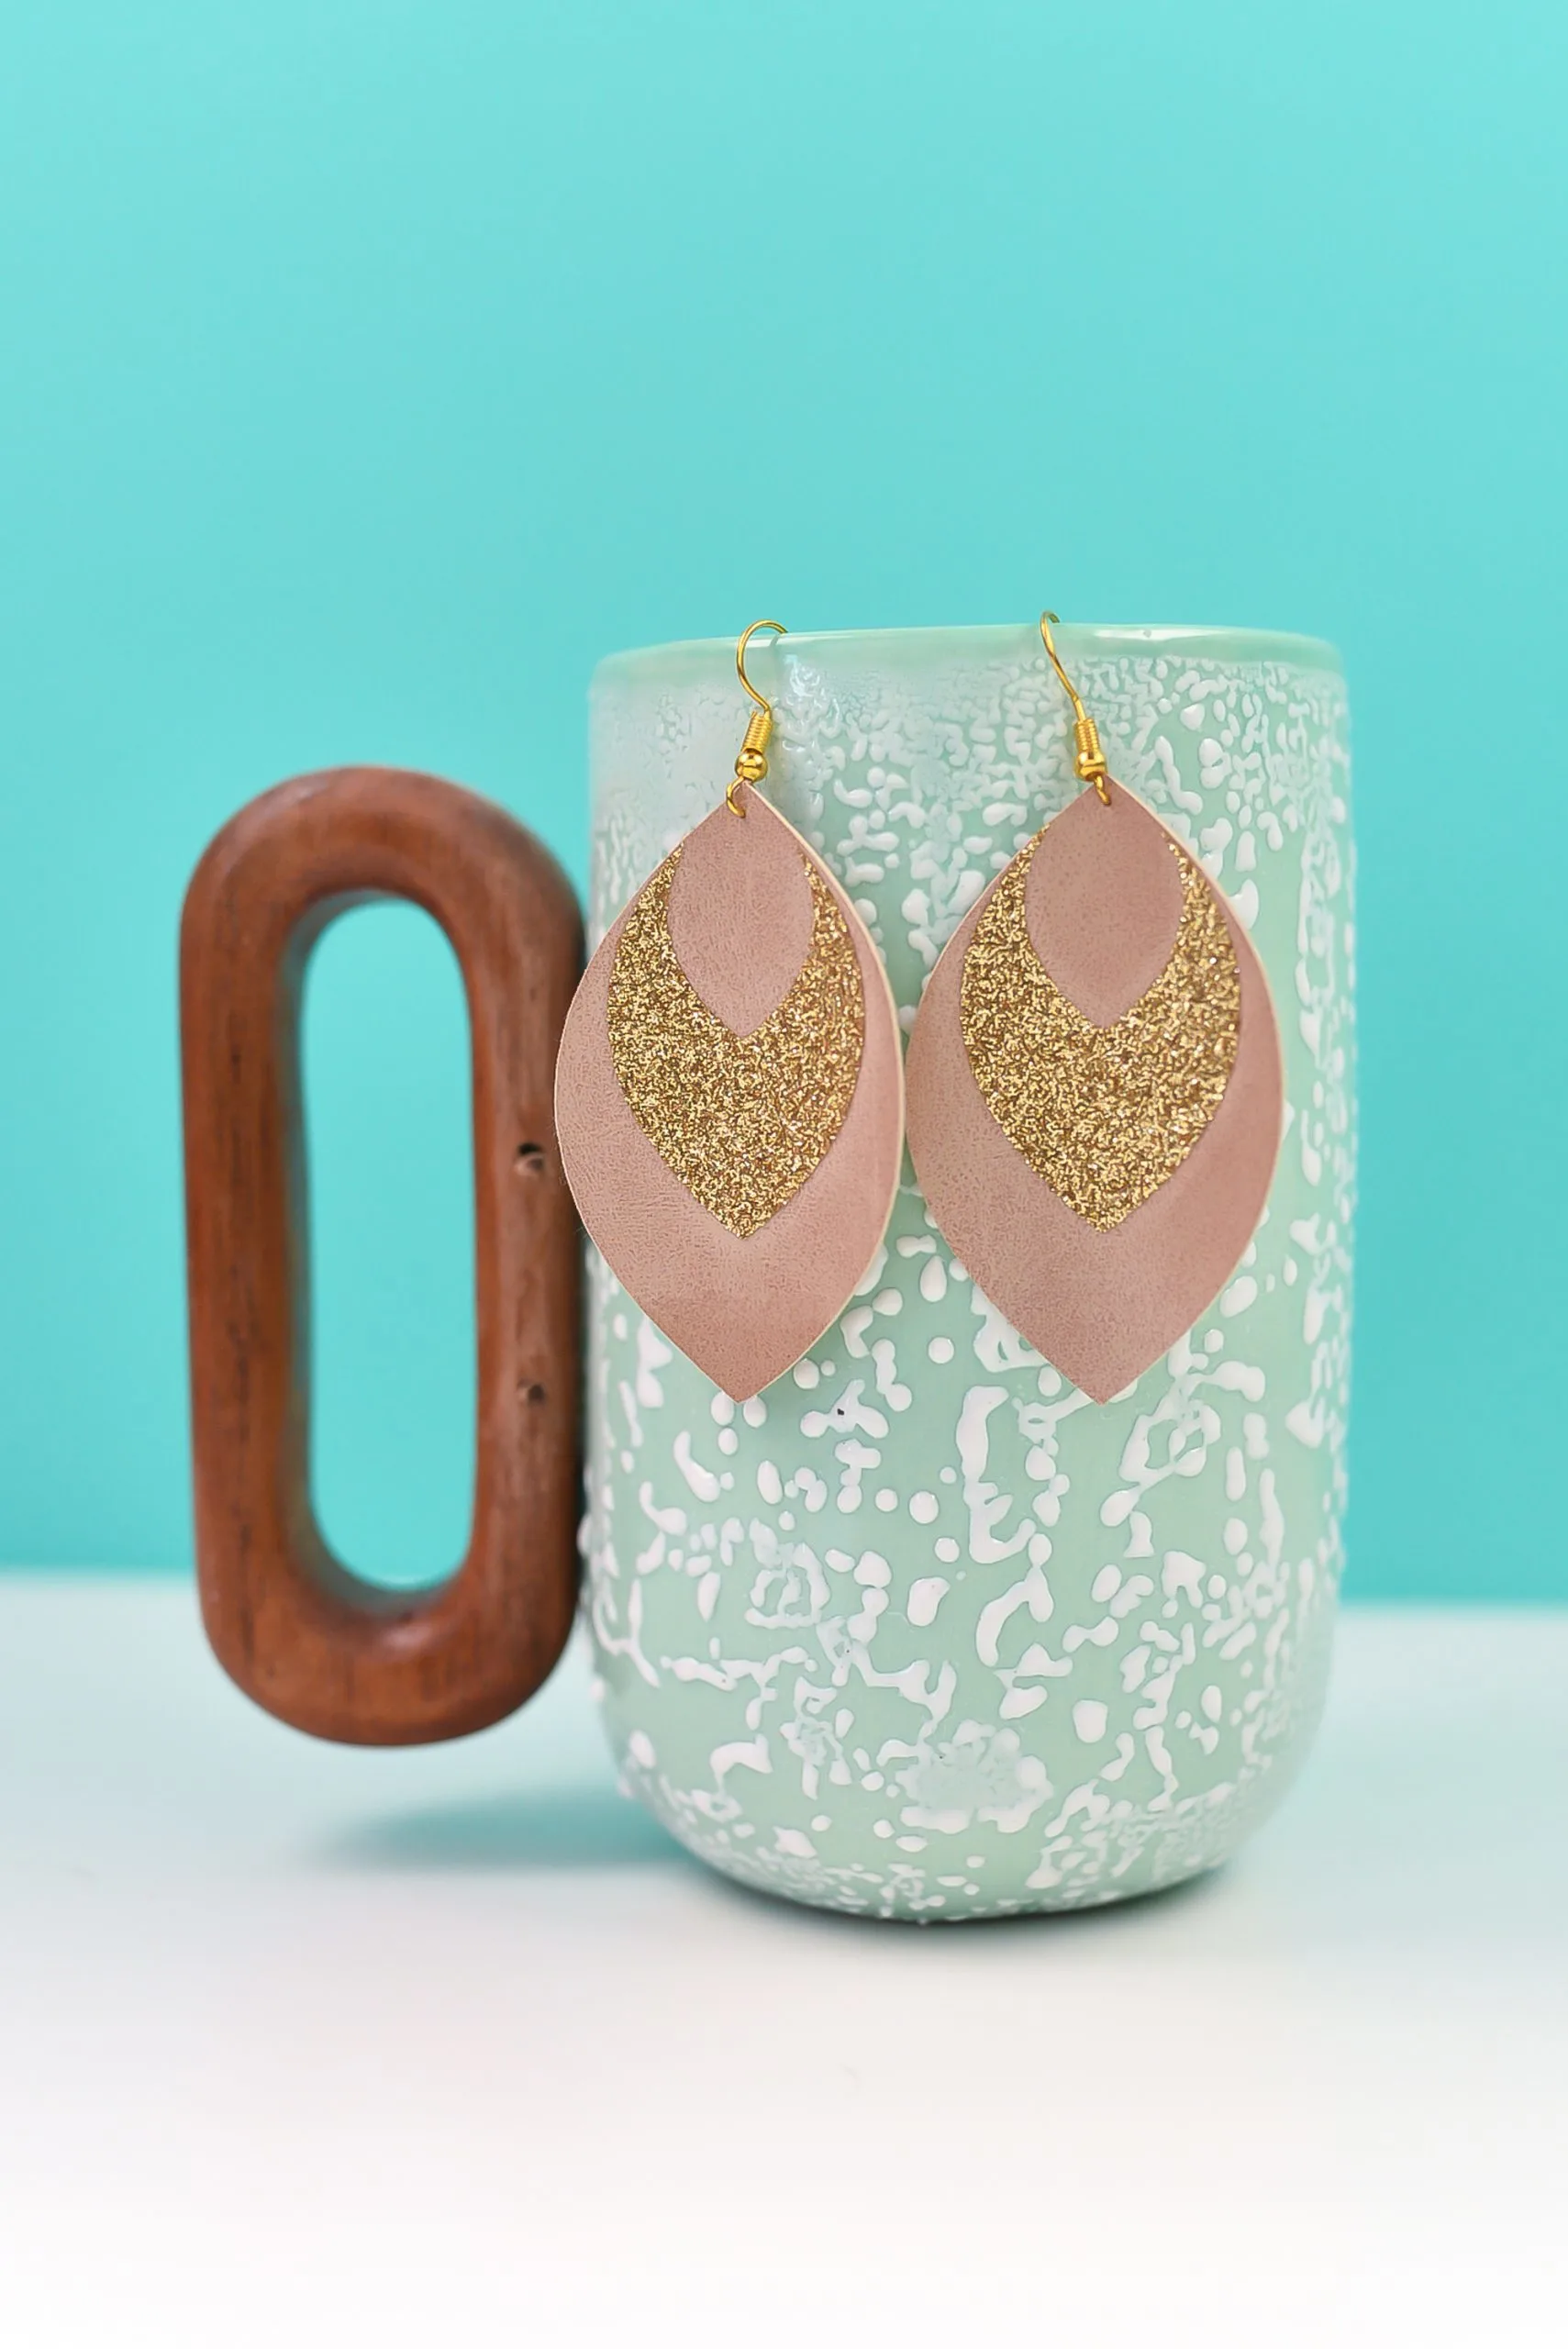 leather earring with glitter made with a Cricut